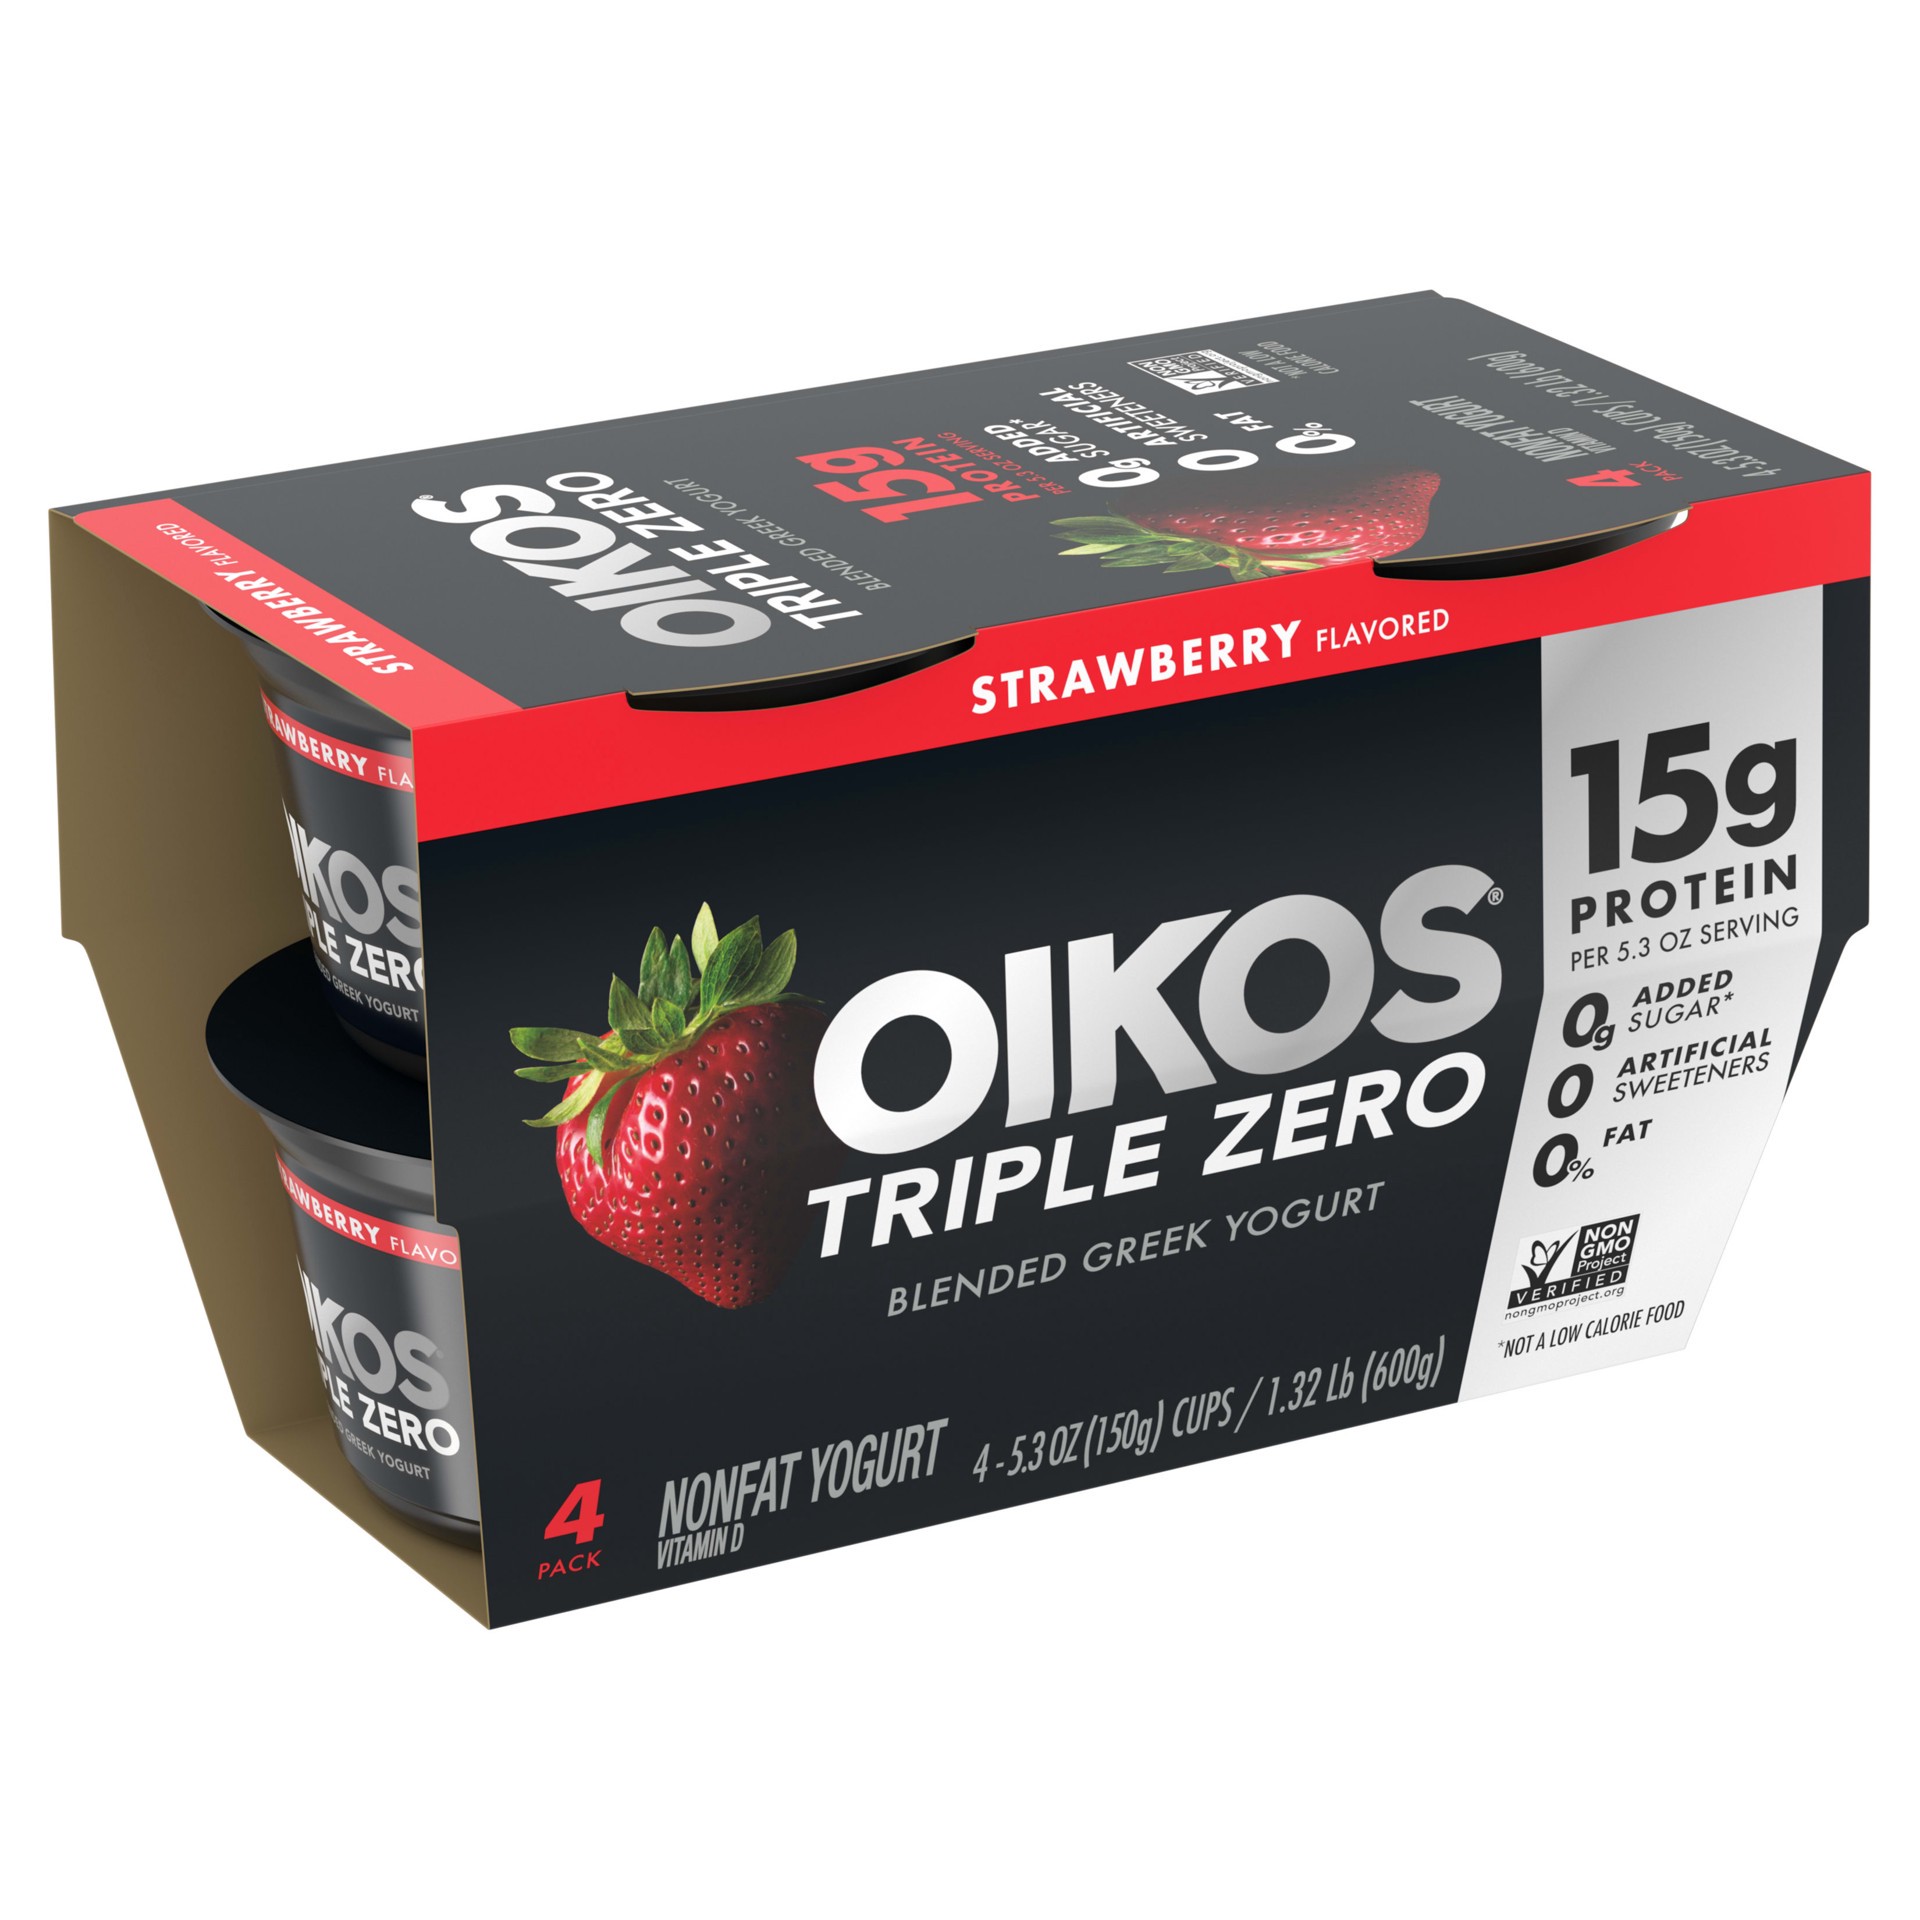 slide 5 of 5, Oikos Triple Zero Strawberry Nonfat Greek Yogurt Pack, 0% Fat, 0g Added Sugar and 0 Artificial Sweeteners, Just Delicious High Protein Yogurt, 4 Ct, 5.3 OZ Cups, 5.3 oz